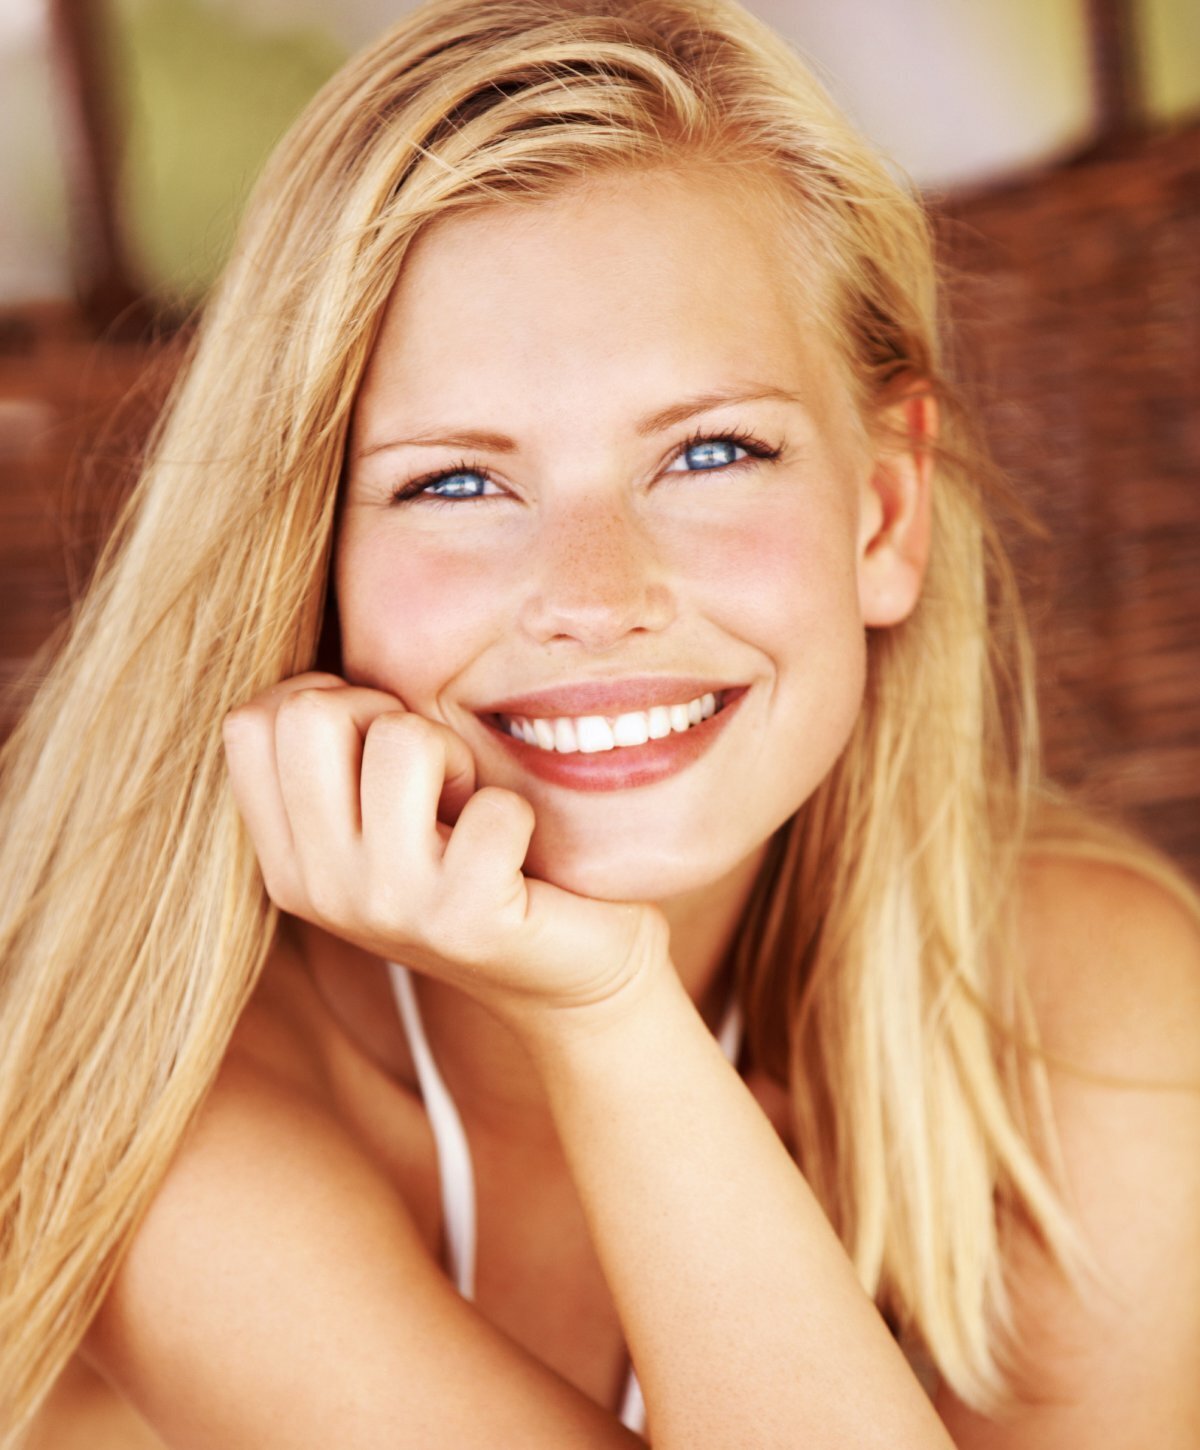 blonde Grand Rapids otoplasty patient model smiling and resting her chin on her hand